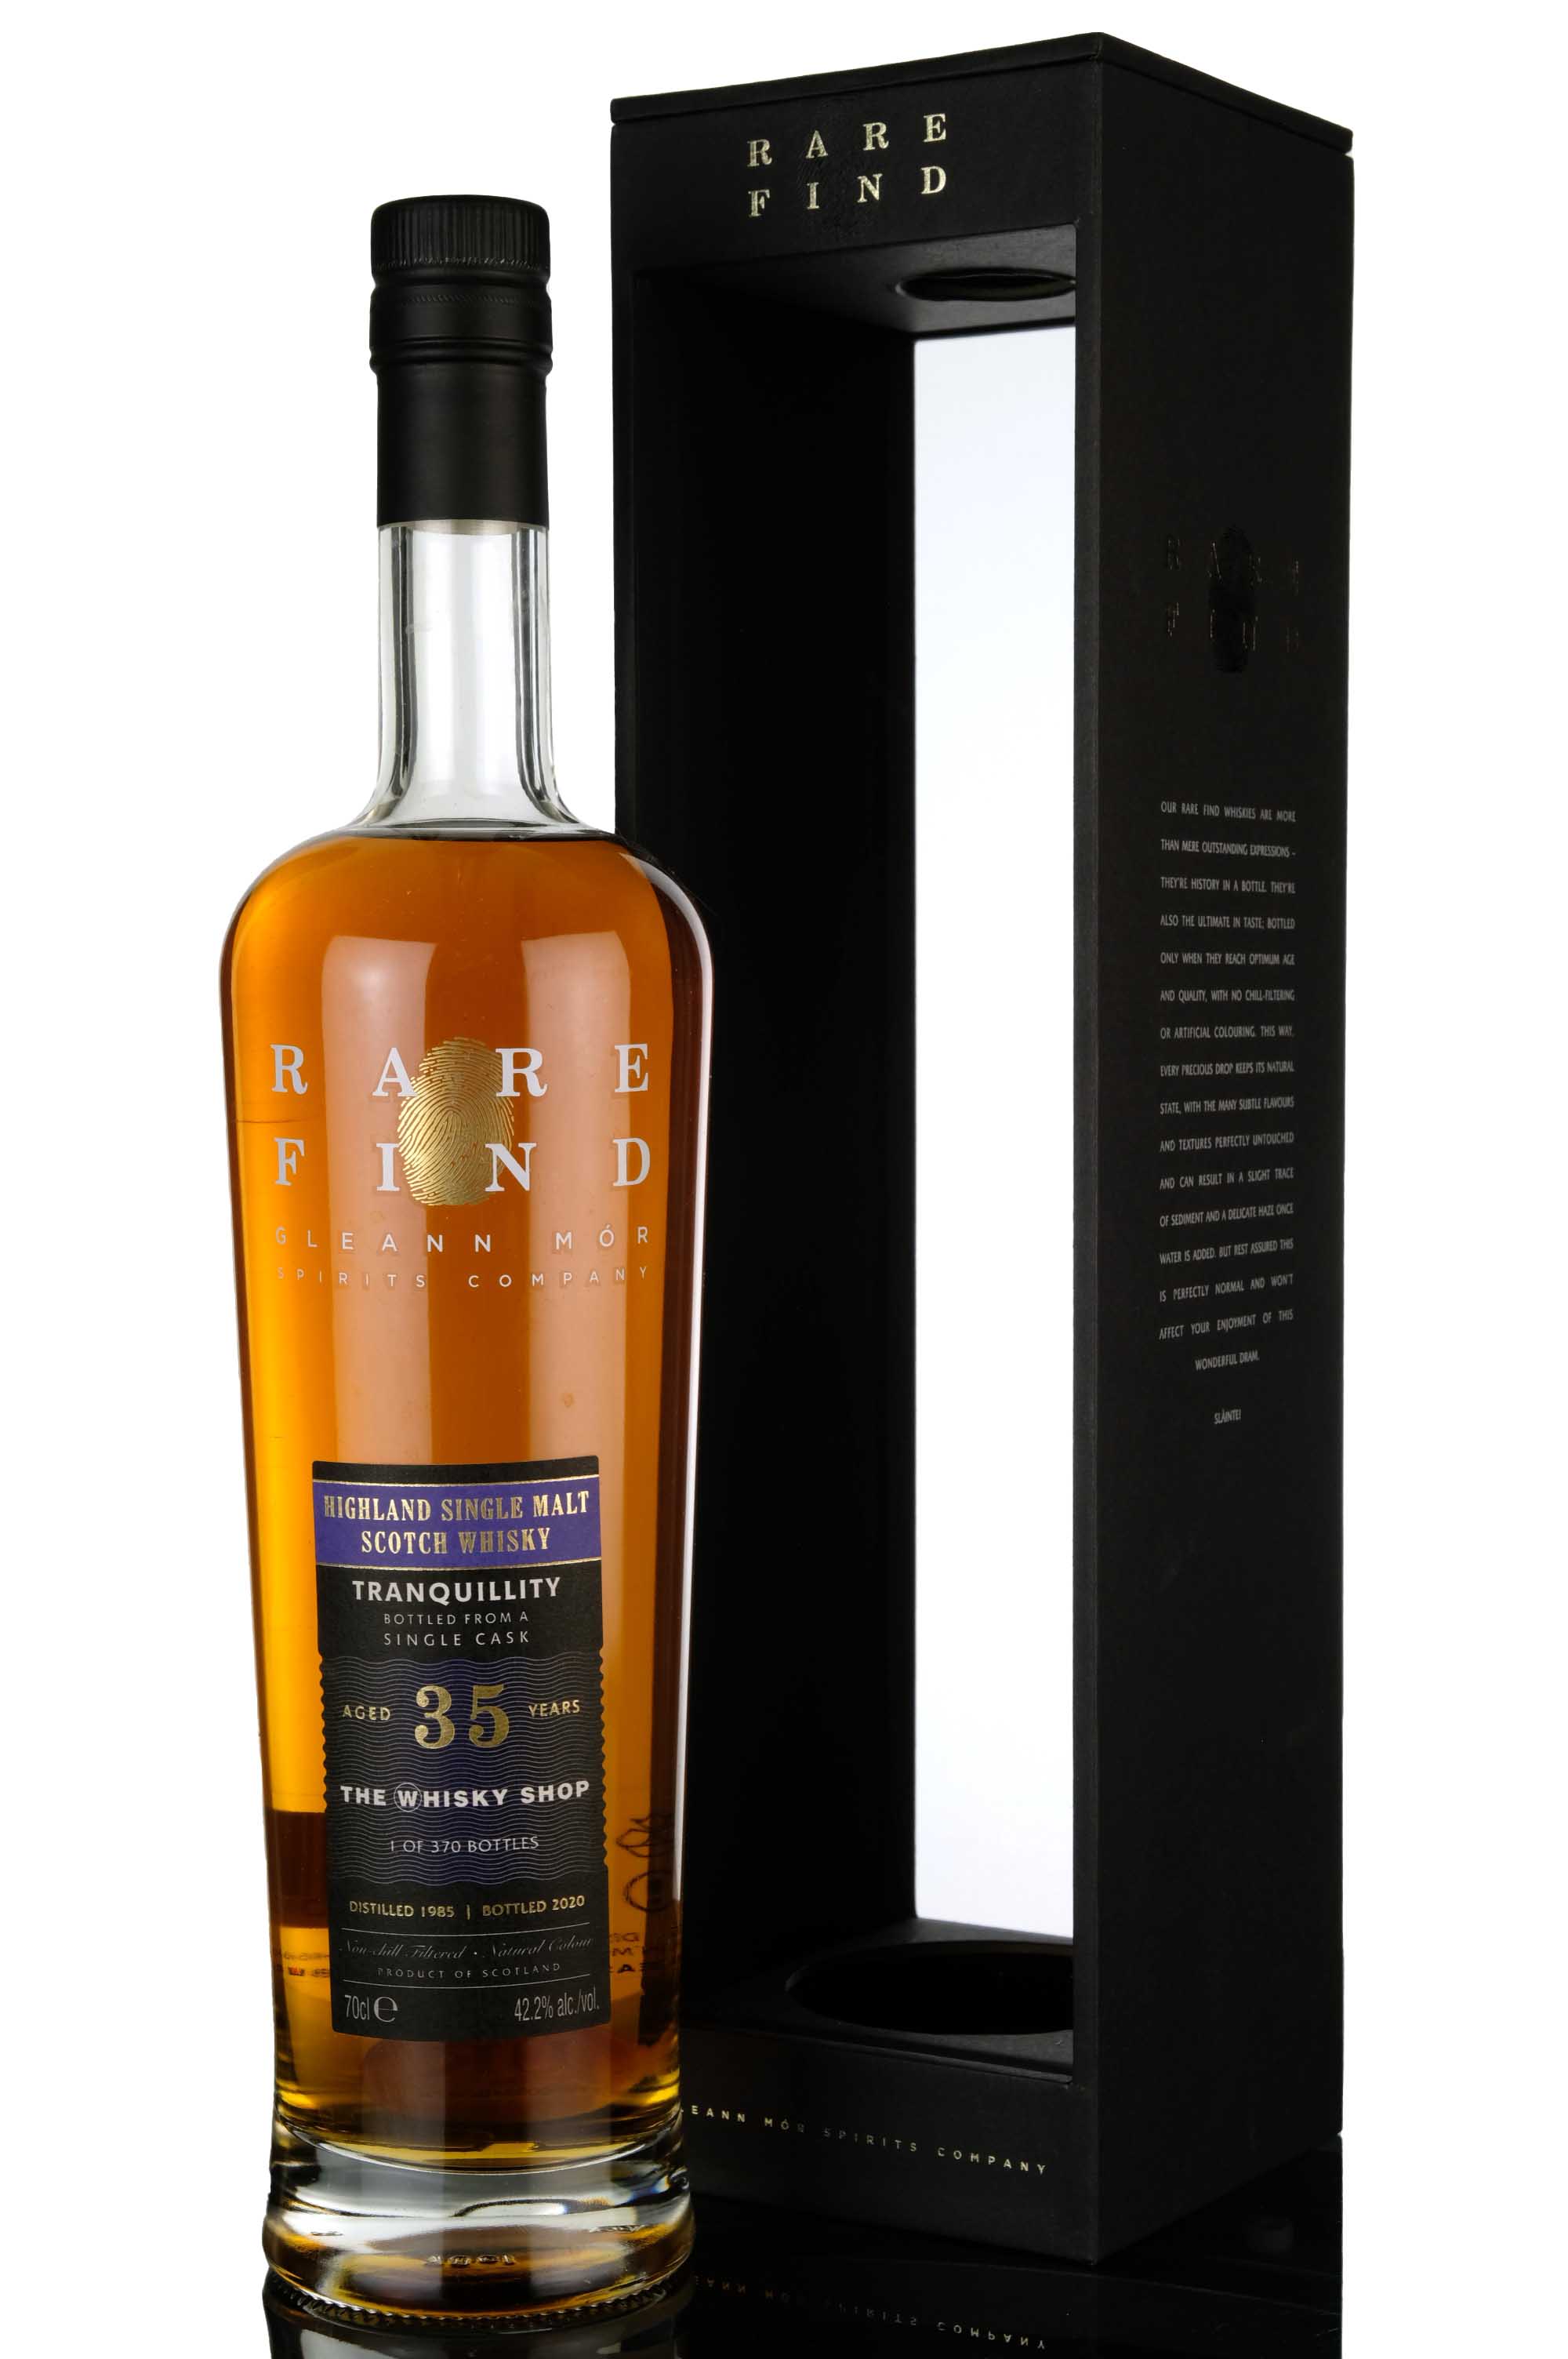 Tranquillity 1985-2020 - 35 Year Old - Gleann Mór - The Whisky Shop Exclusive